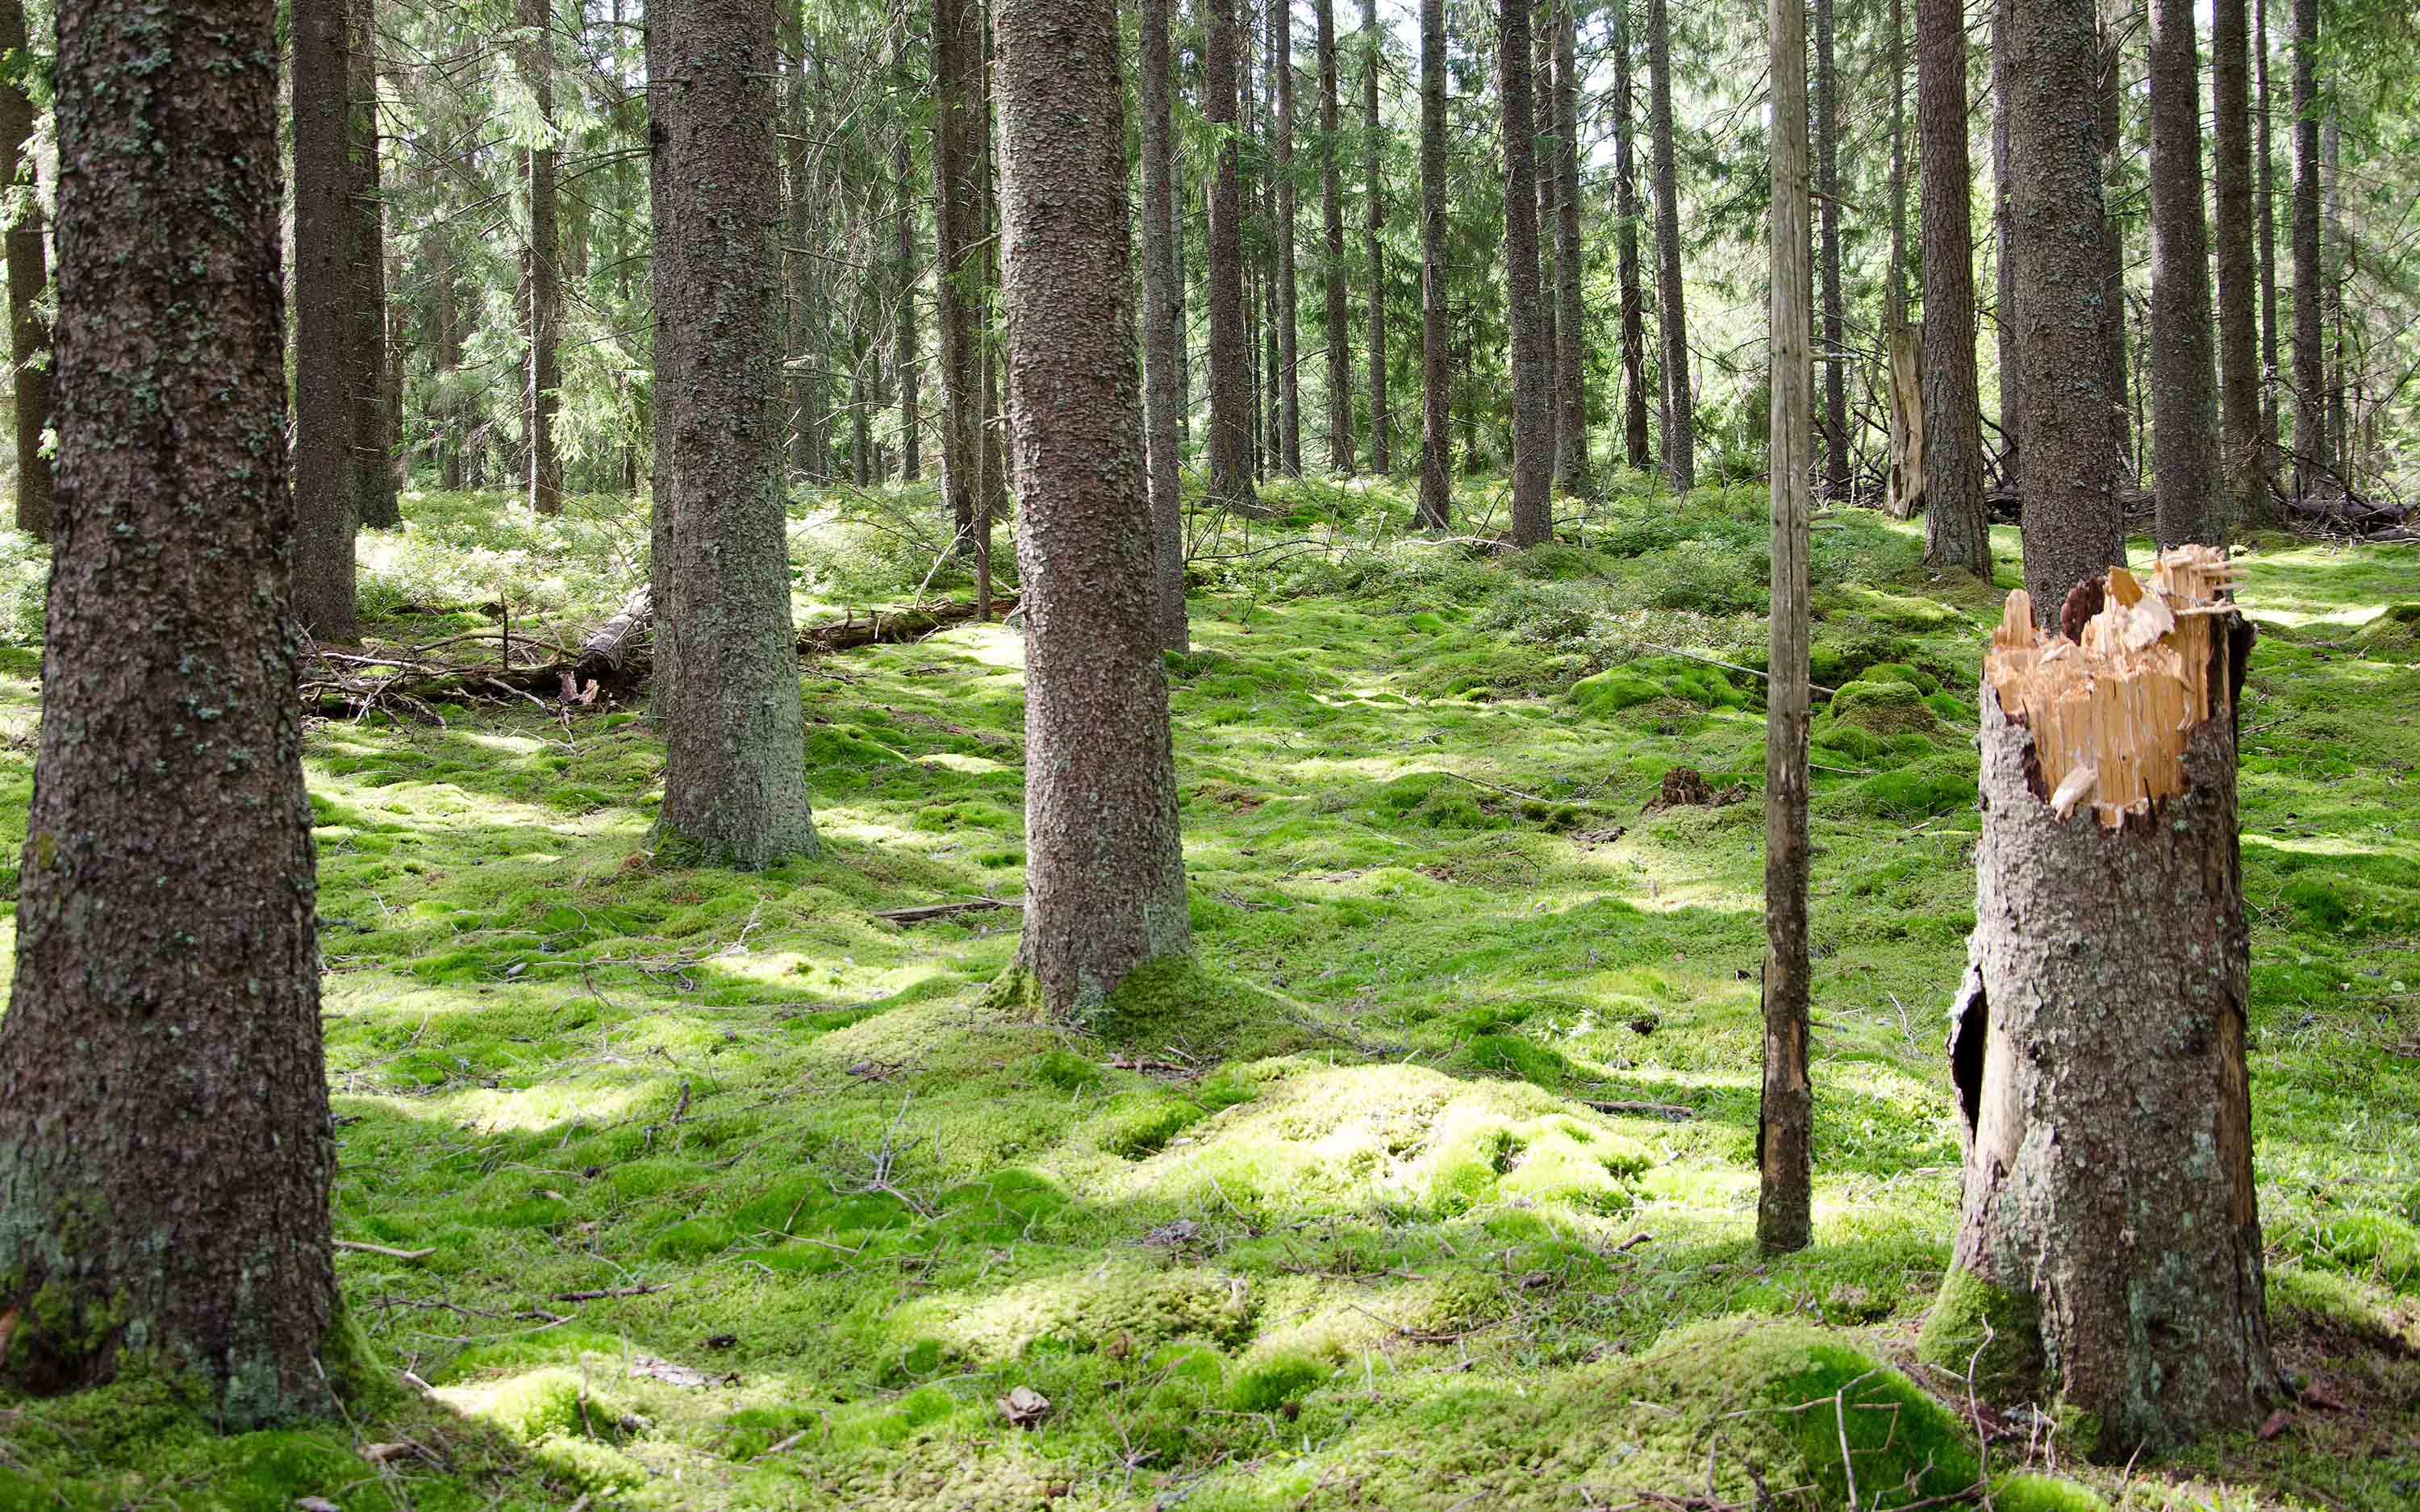 Spruces on moss-covered ground.